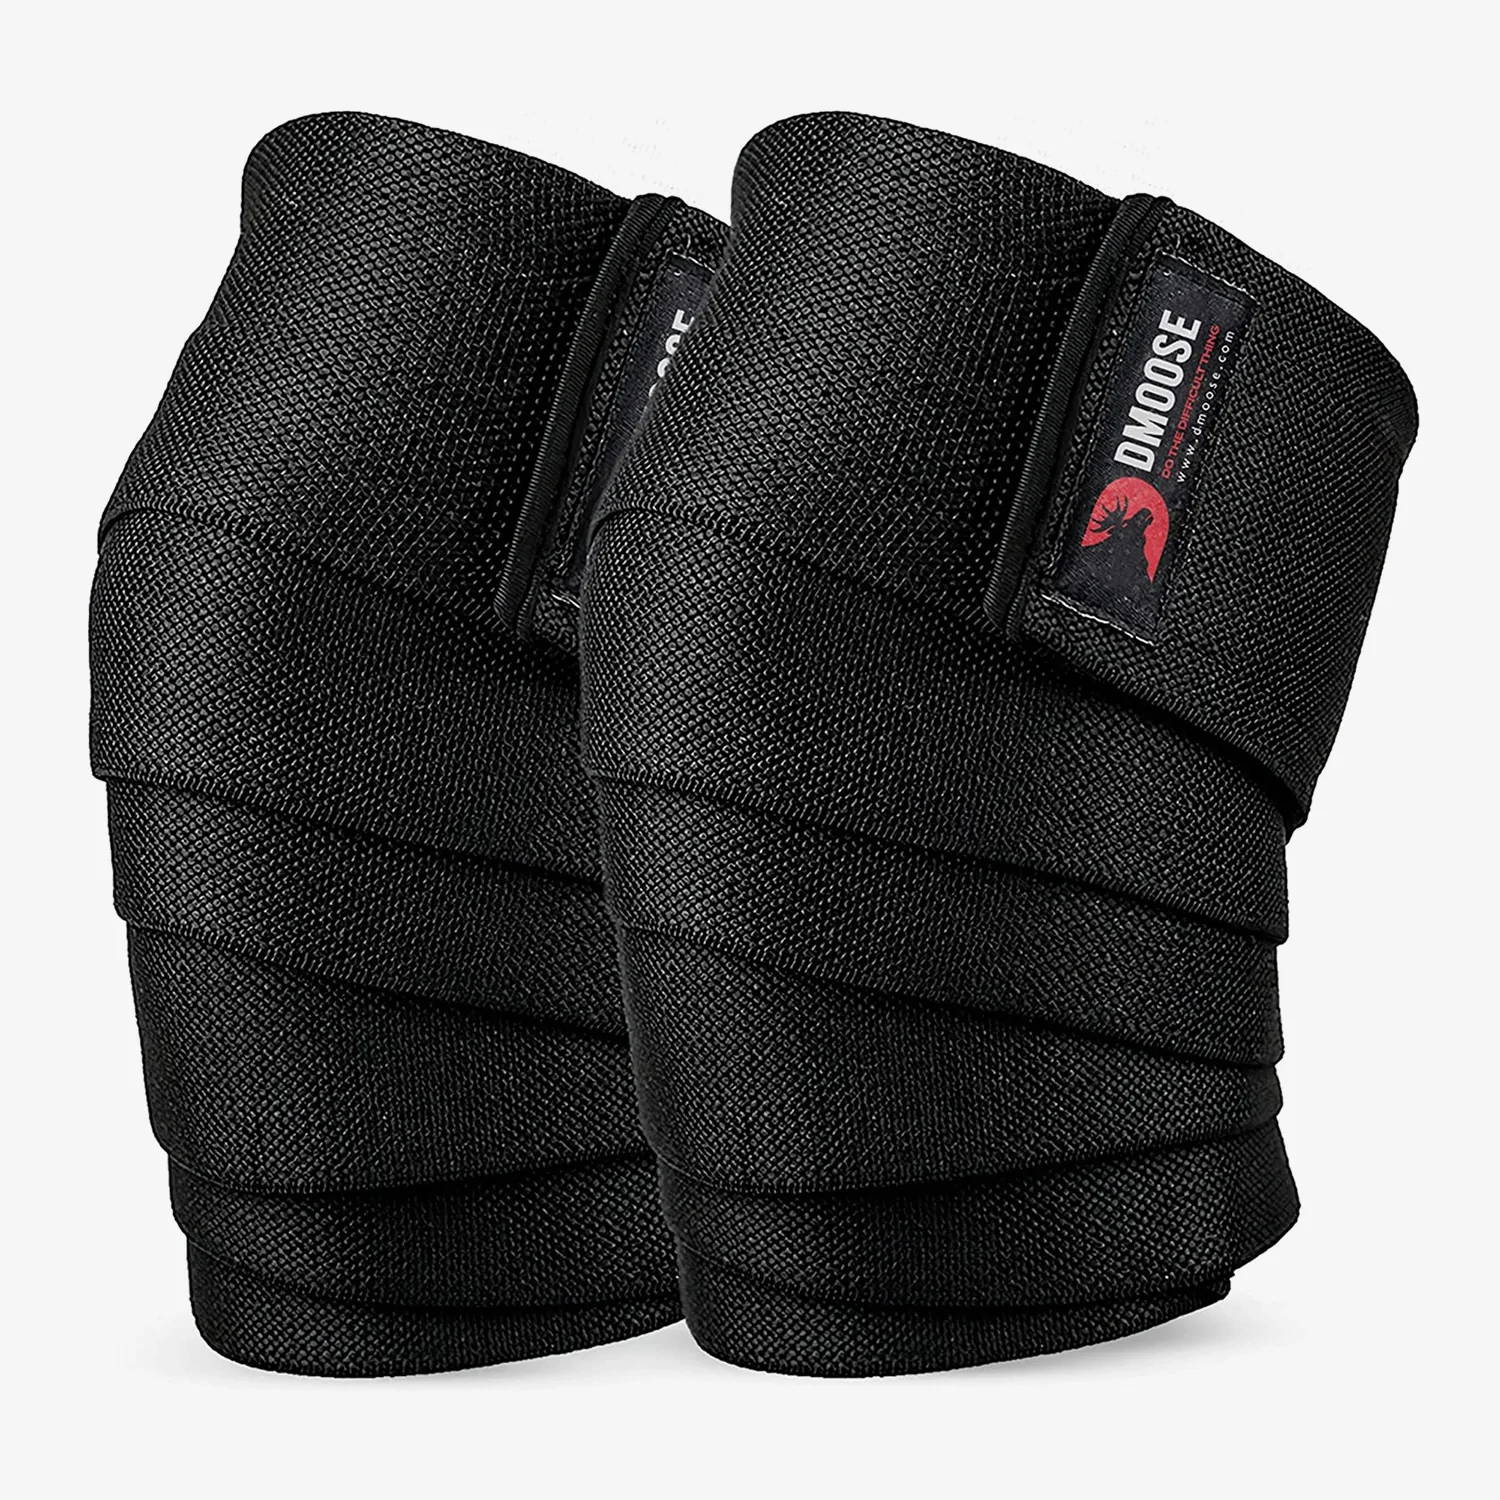 DMoose Knee Wraps for Weightlifting